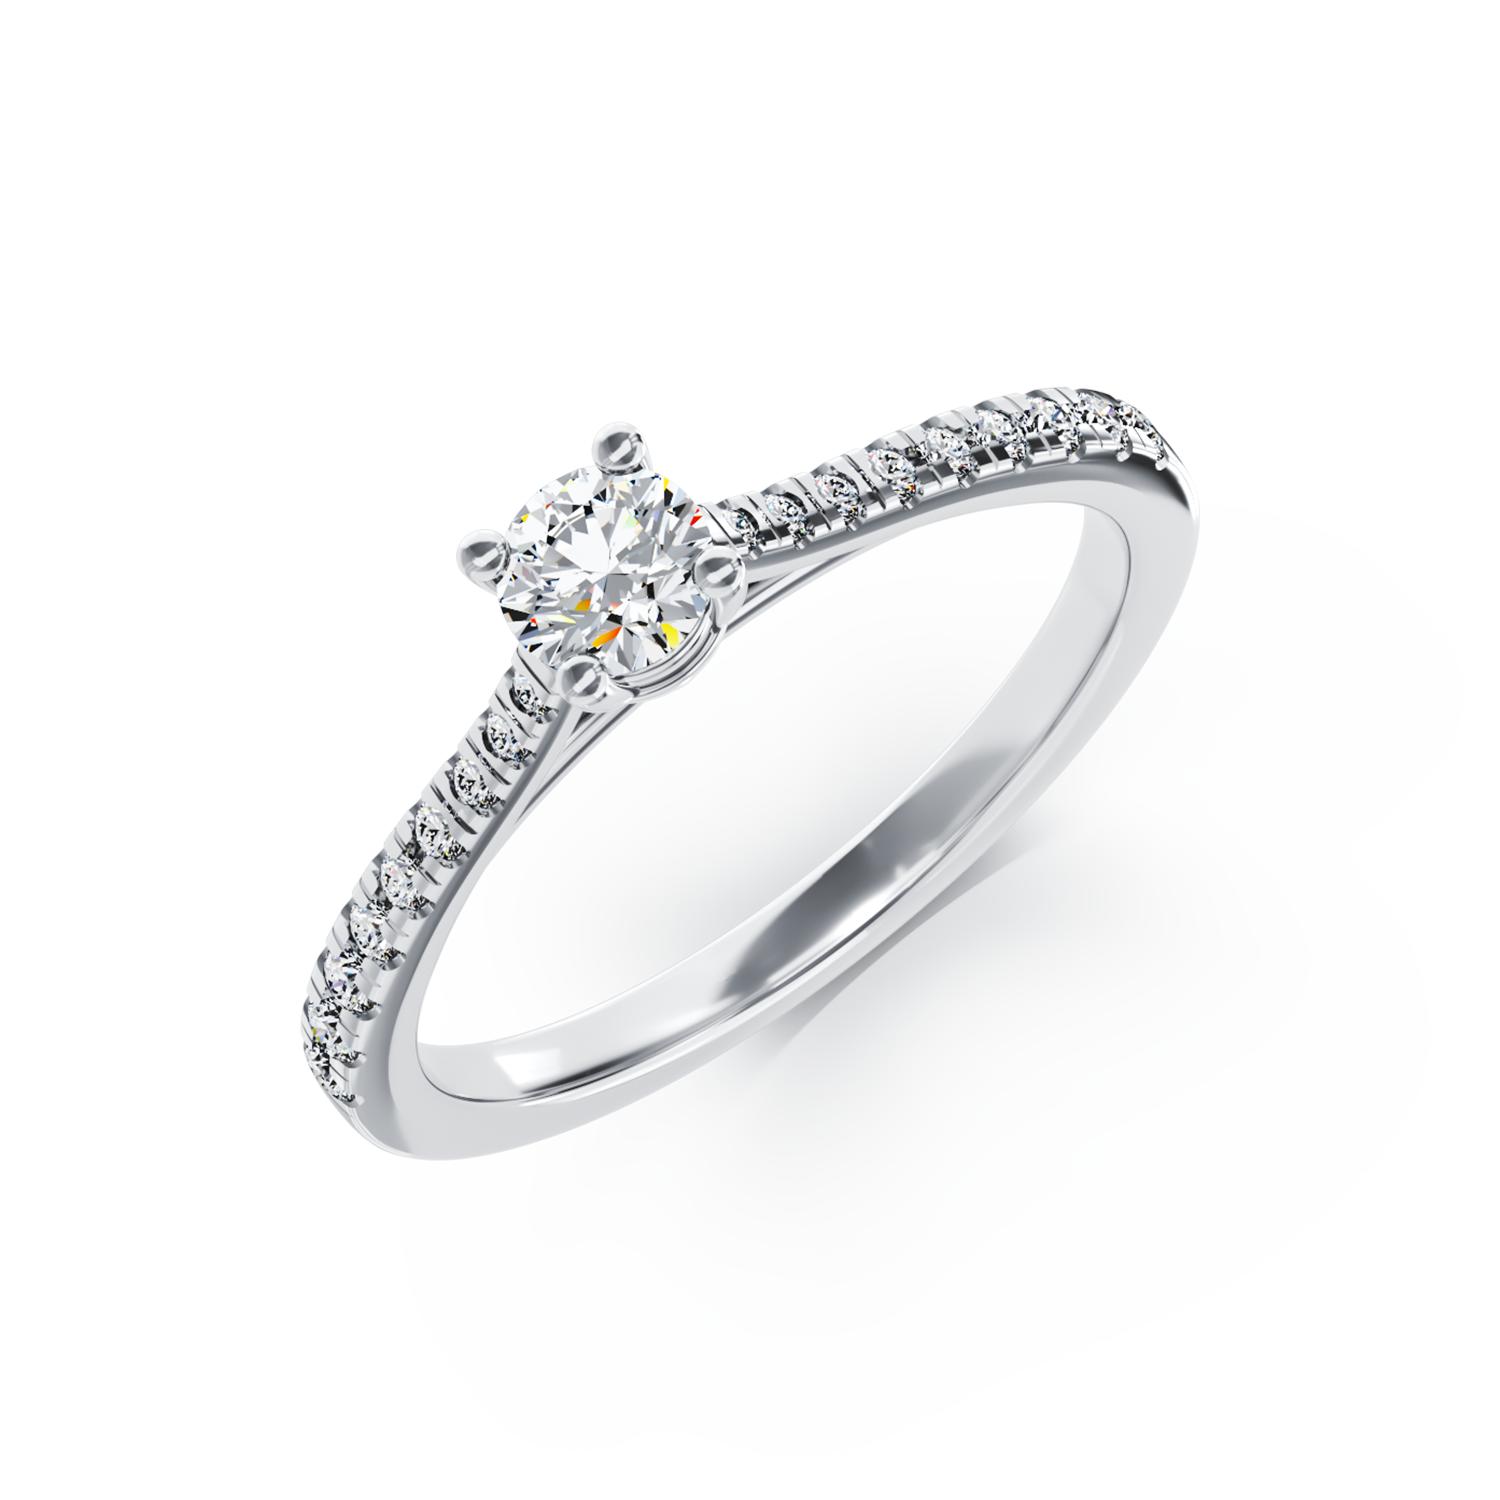 18K white gold engagement ring with diamond of 0.24ct and diamonds of 0.17ct